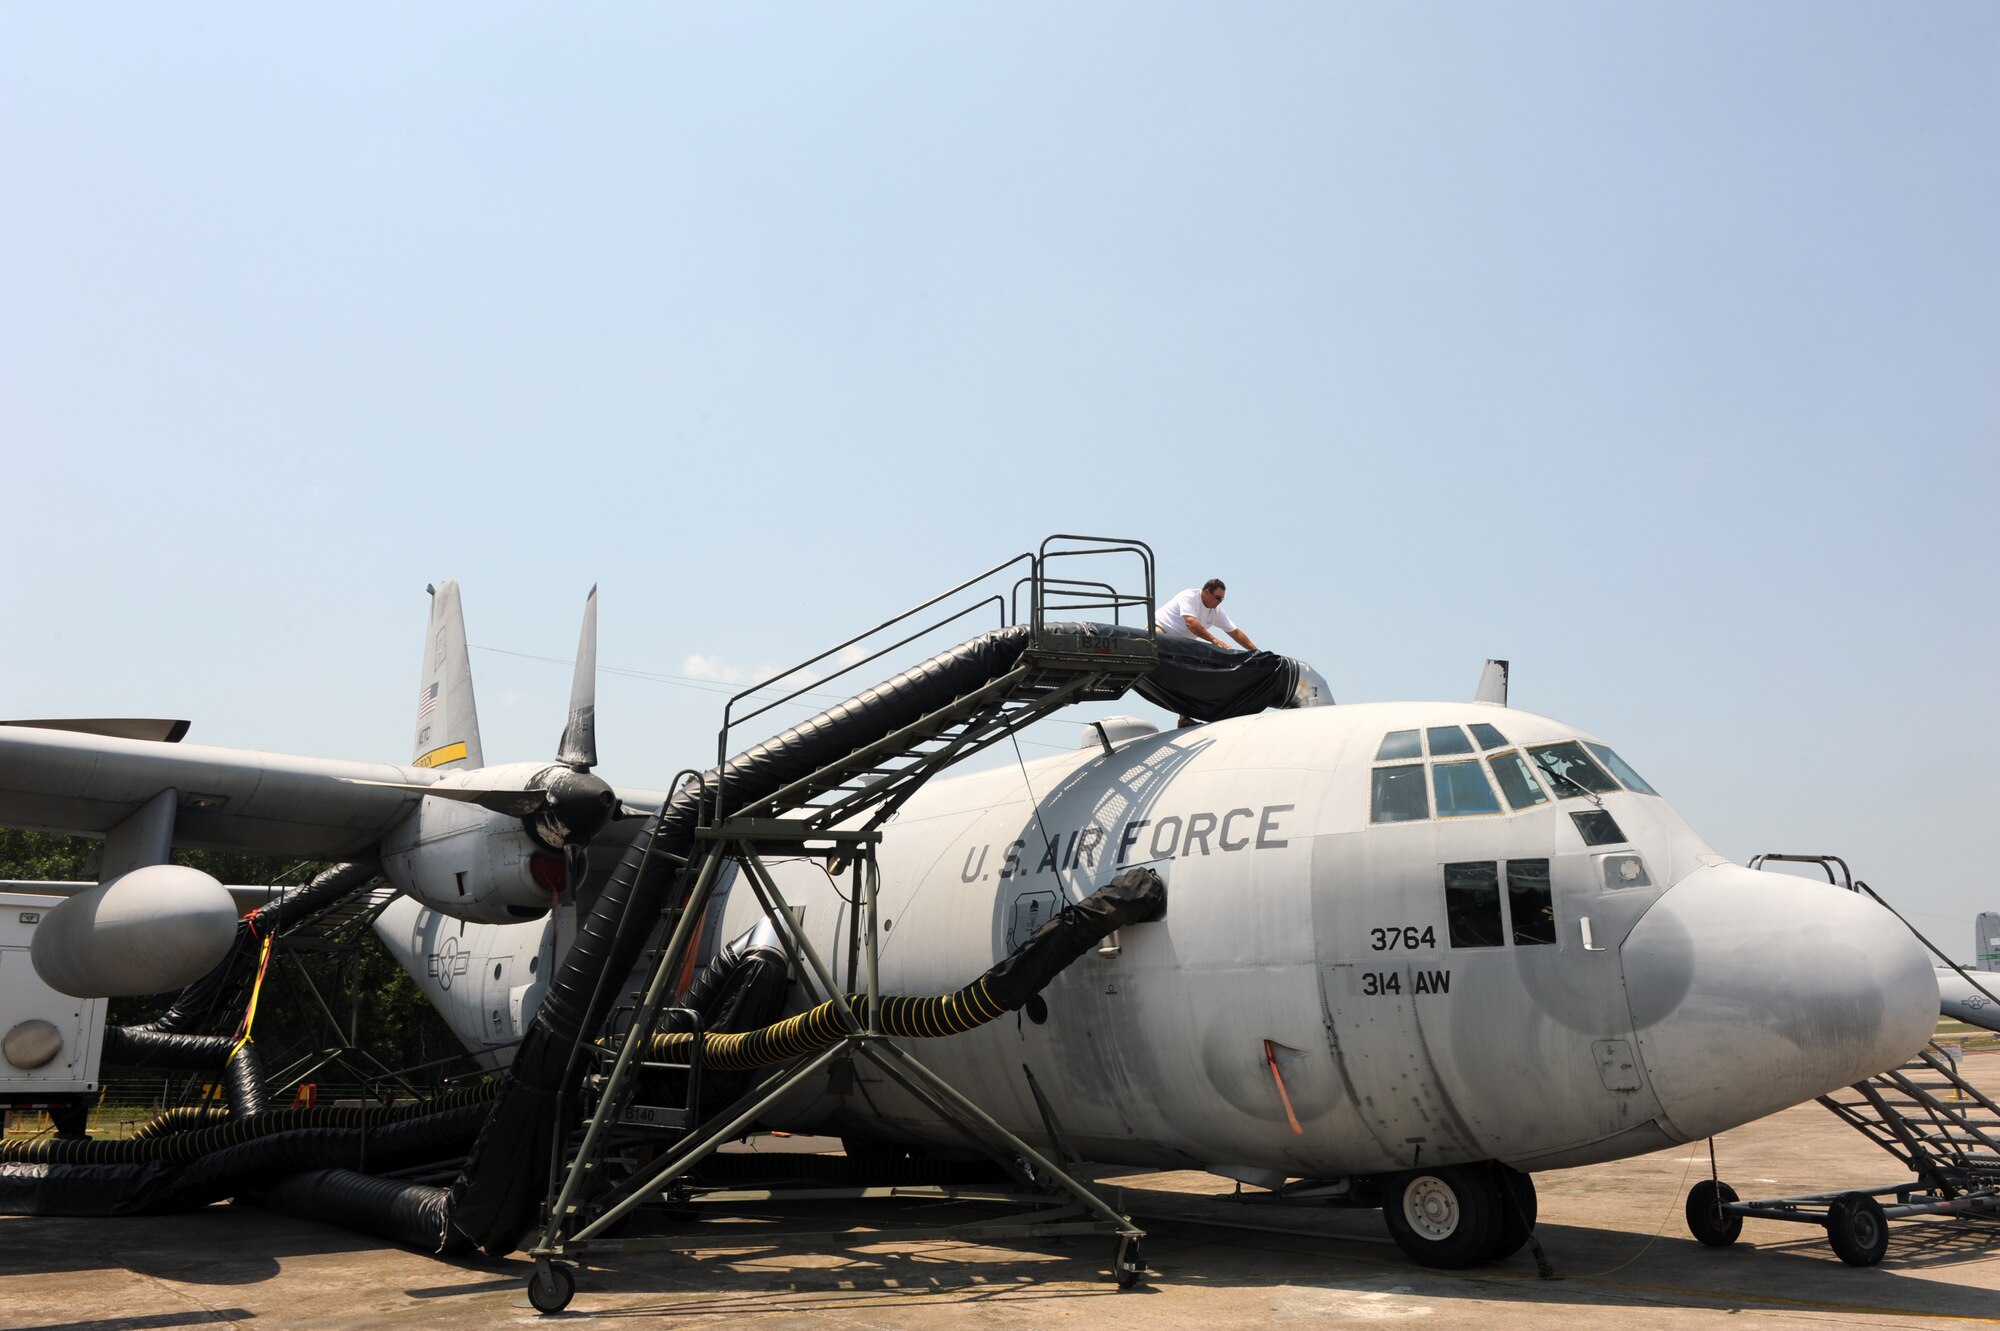 William Dunn, a contractor, checks the connection points of a decontamination duct on a C-130 on July 6, 2011, at Little Rock Air Force Base, Ark. The decontamination duct supplies hot humid air to the aircraft to determine how heat and humidity affect the decontamination process for an aircraft contaminated with a simulated biological agent. (U.S. Air Force photo by Airman 1st Class Rusty Frank) 